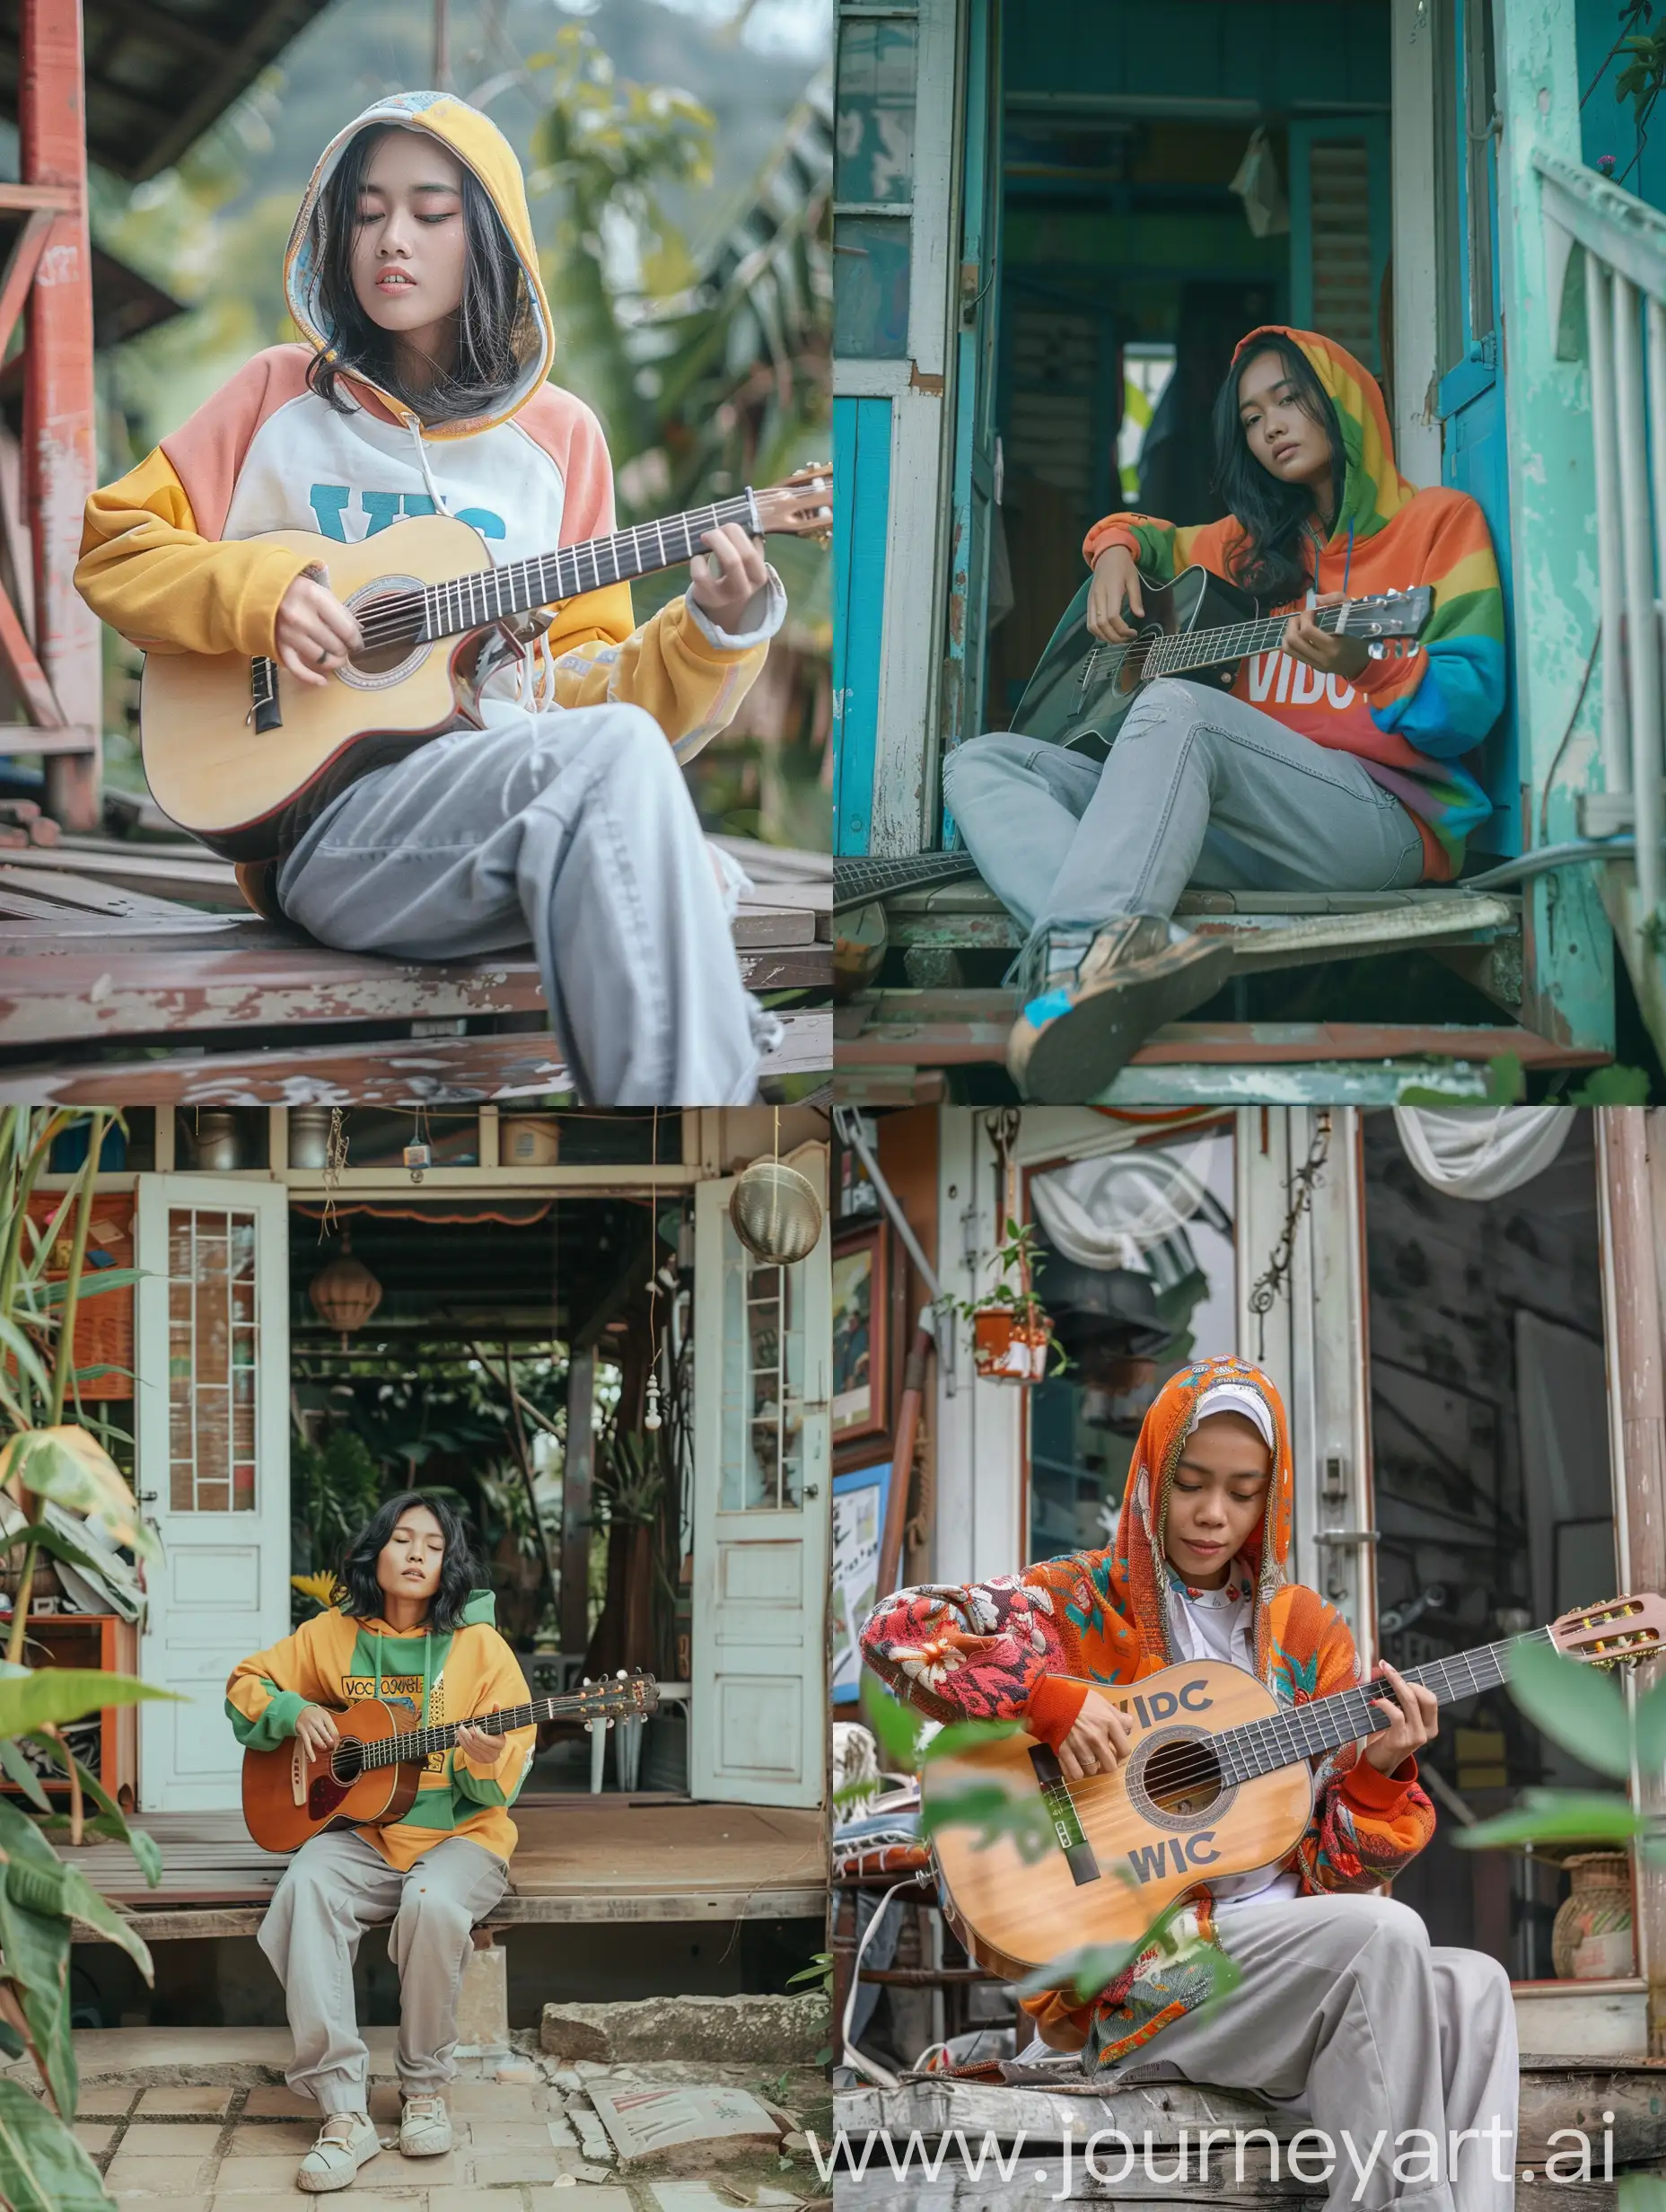 Original and authentic photo of a beautiful 30 year old Indonesian woman, wearing a colourfull hoodie with the word (VDC), light gray trousers, sitting on the terrace of a simple house while playing guitar, HD 16k photo quality clear and bright resolution